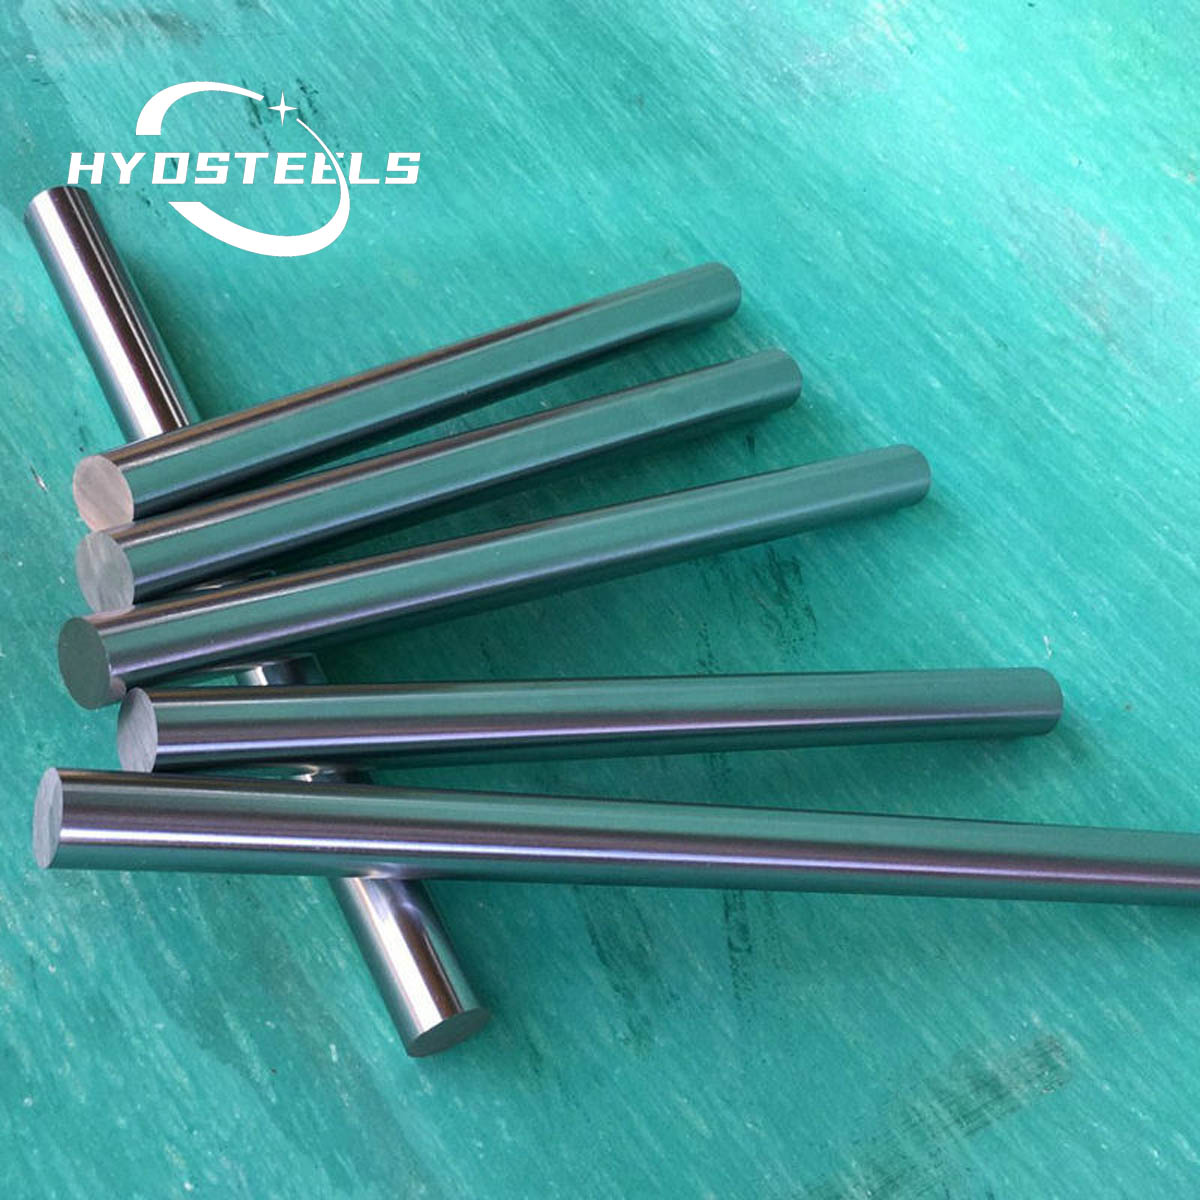 CK45 Hard Chrome Plated Piston Rod for Hydraulic Cylinder